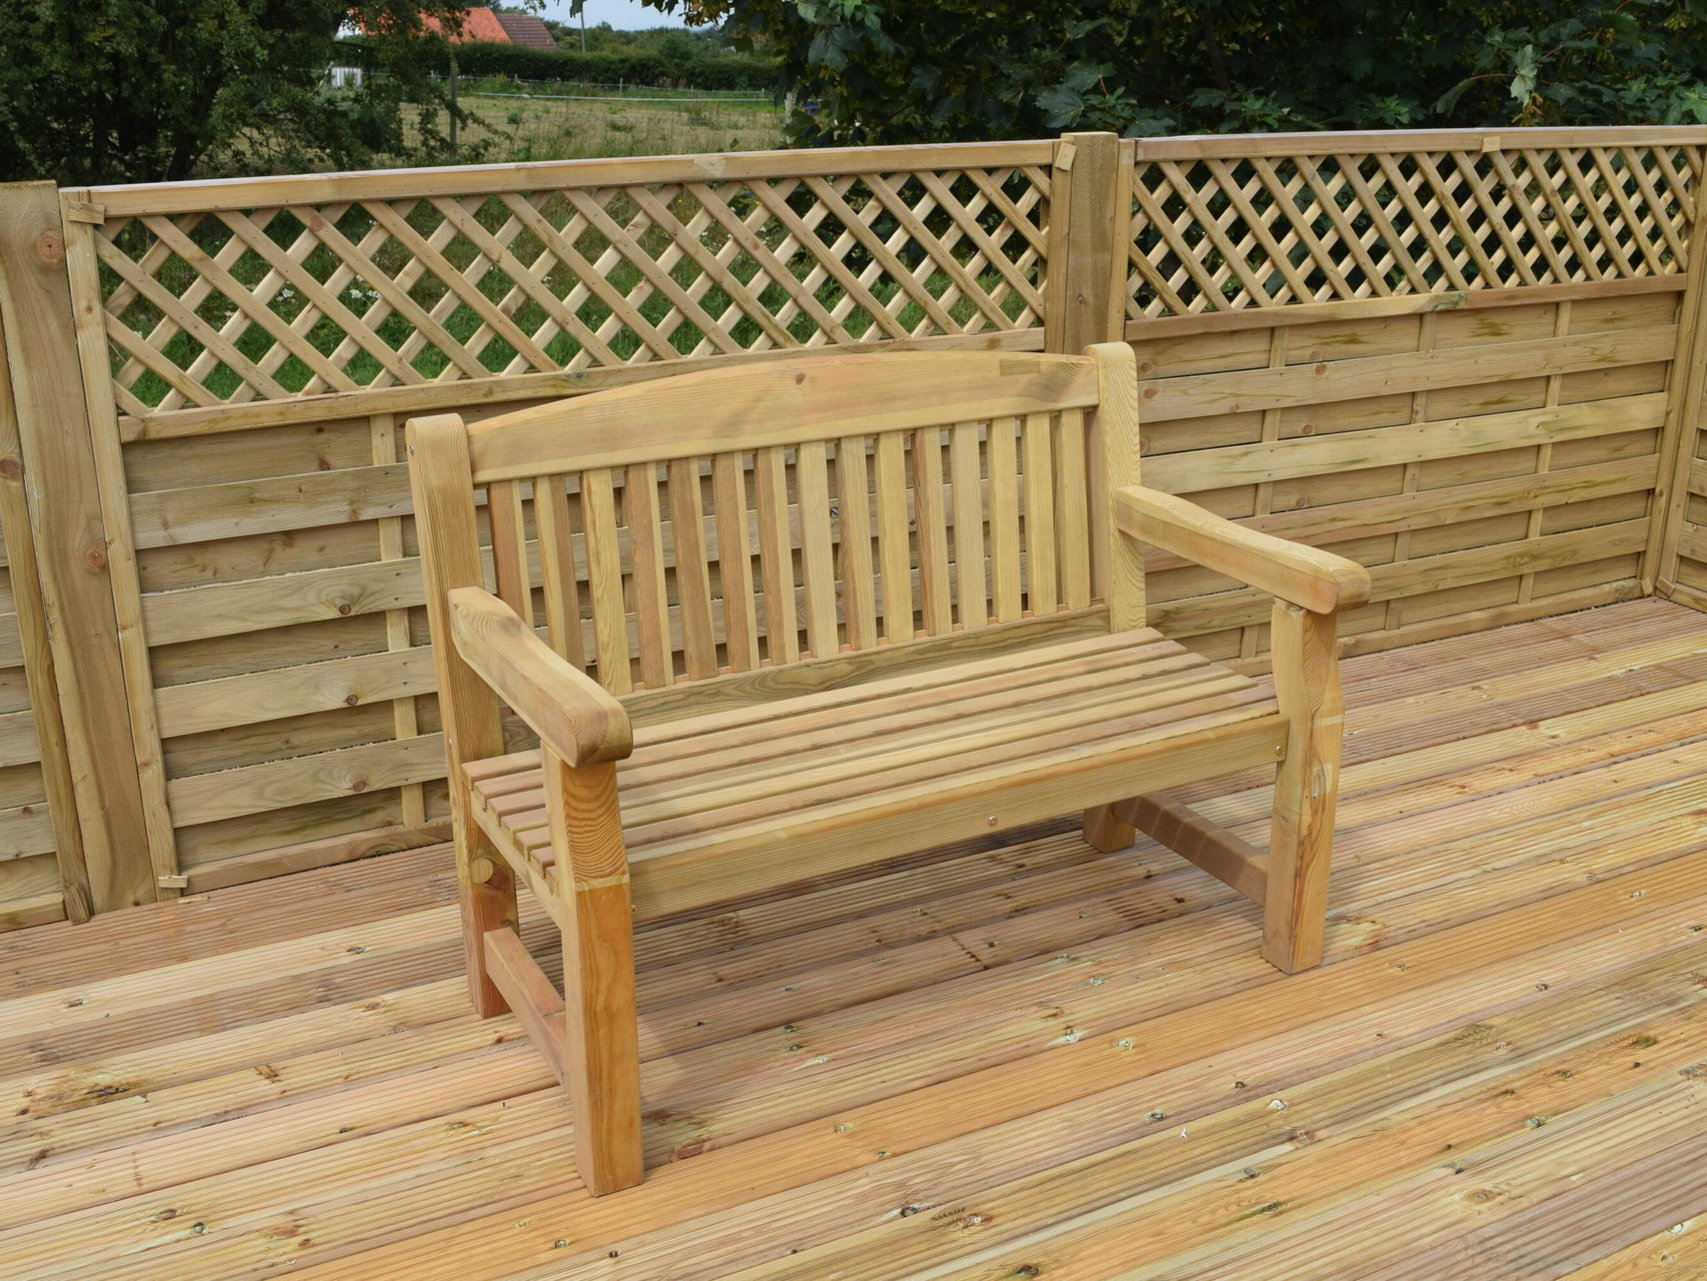 A wooden bench on decking